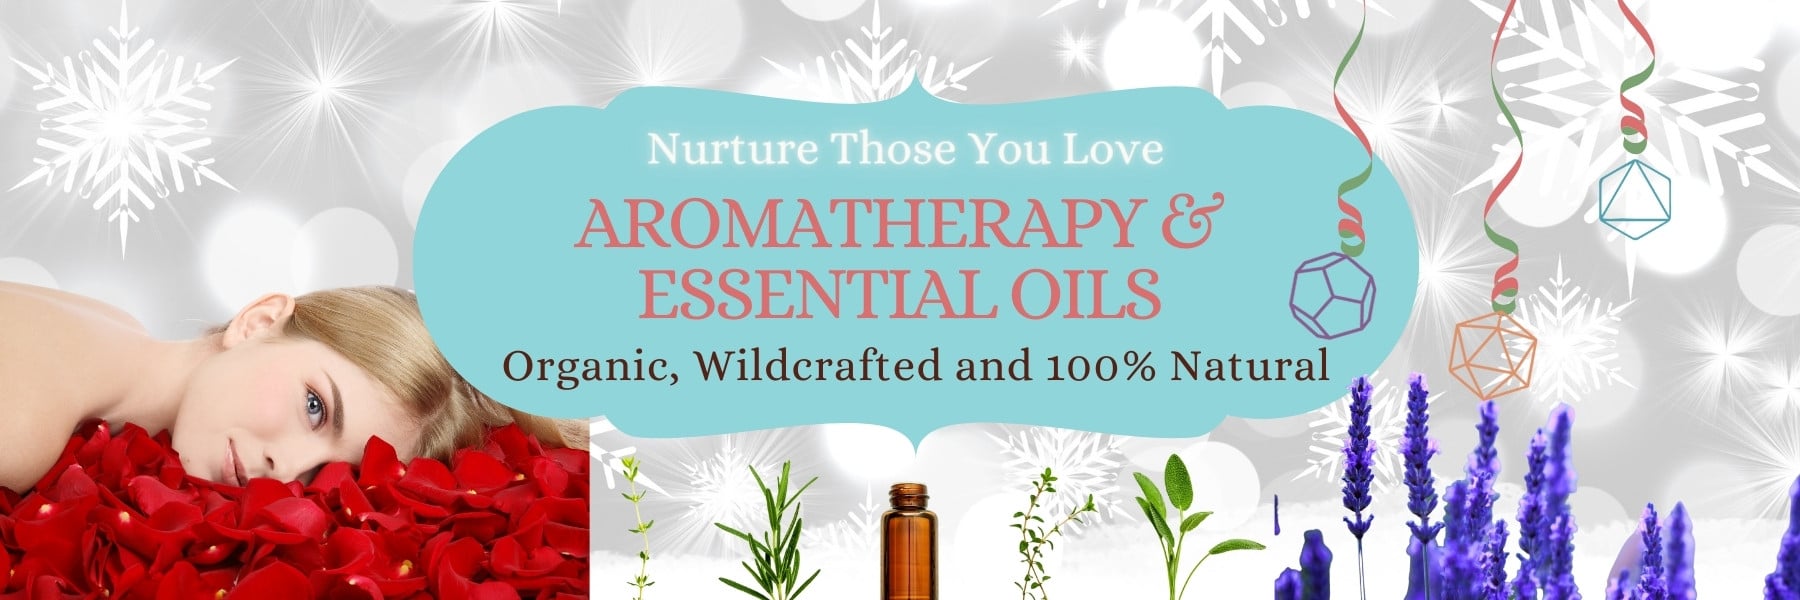 Aromatherapy And Organic Essential Oils Banner